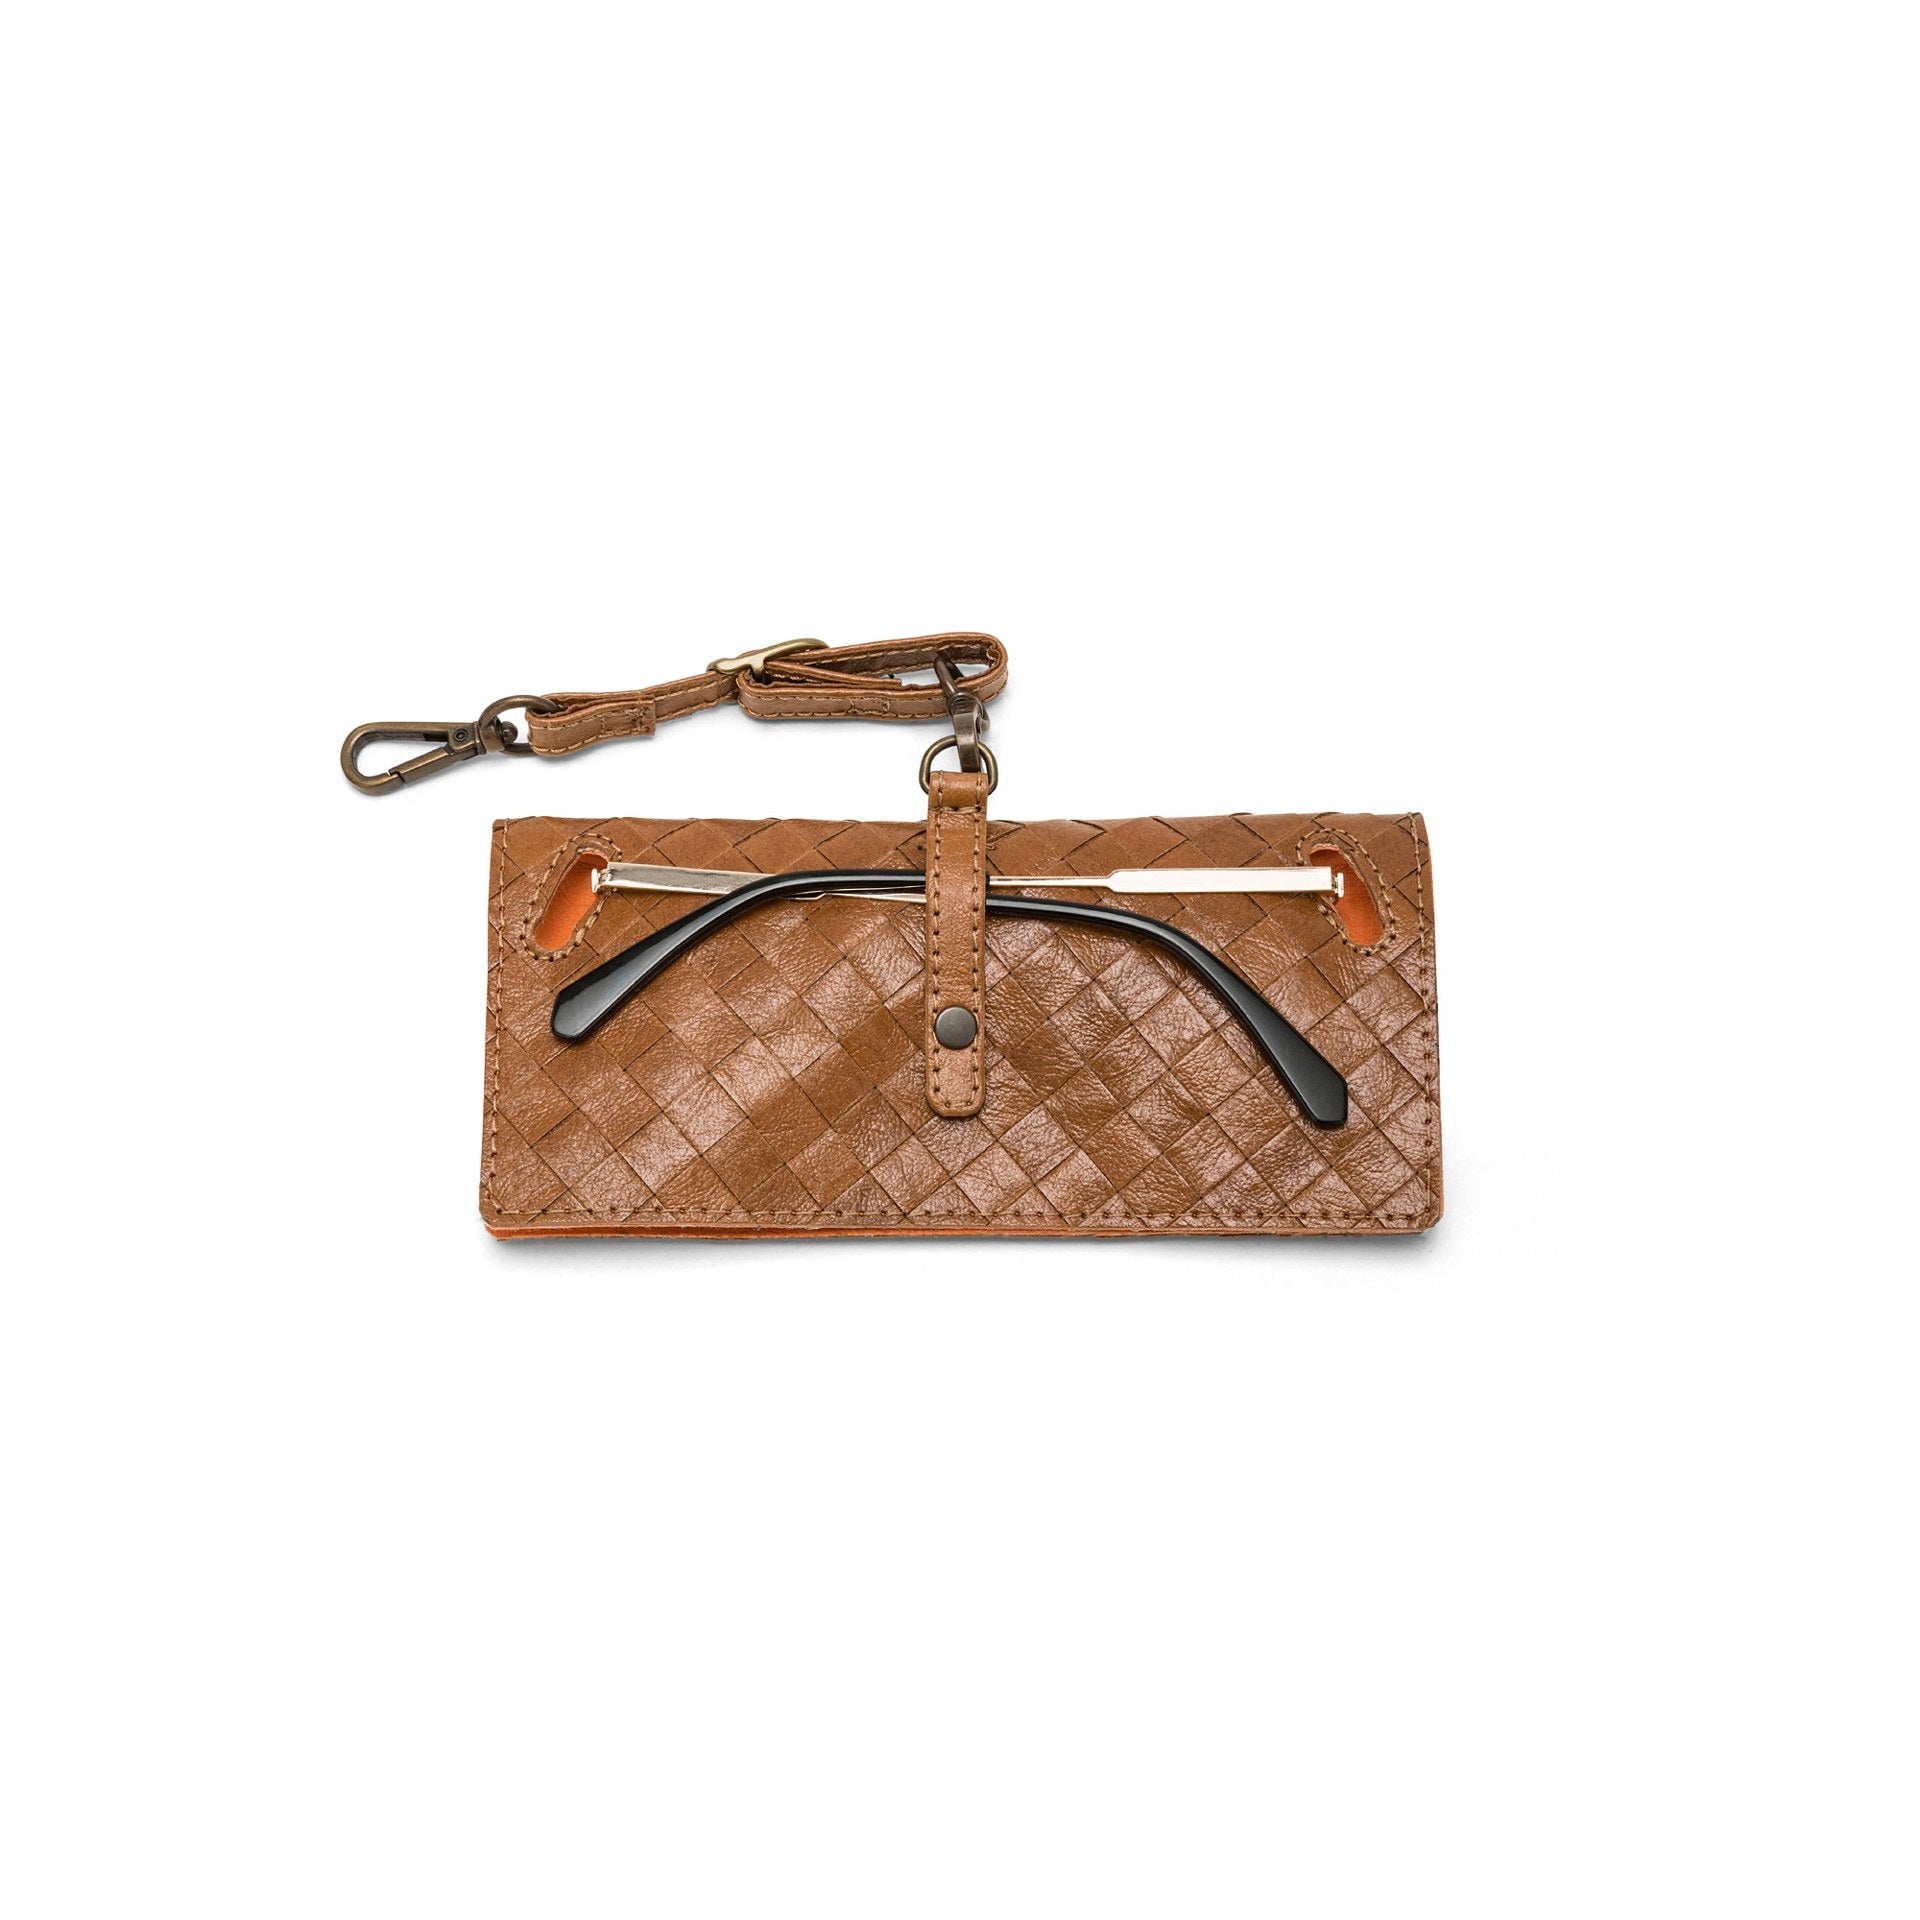 A mid brown woven washable paper glasses case is shown from the back angle with a metal stud closure and a washable paper strap attachment.